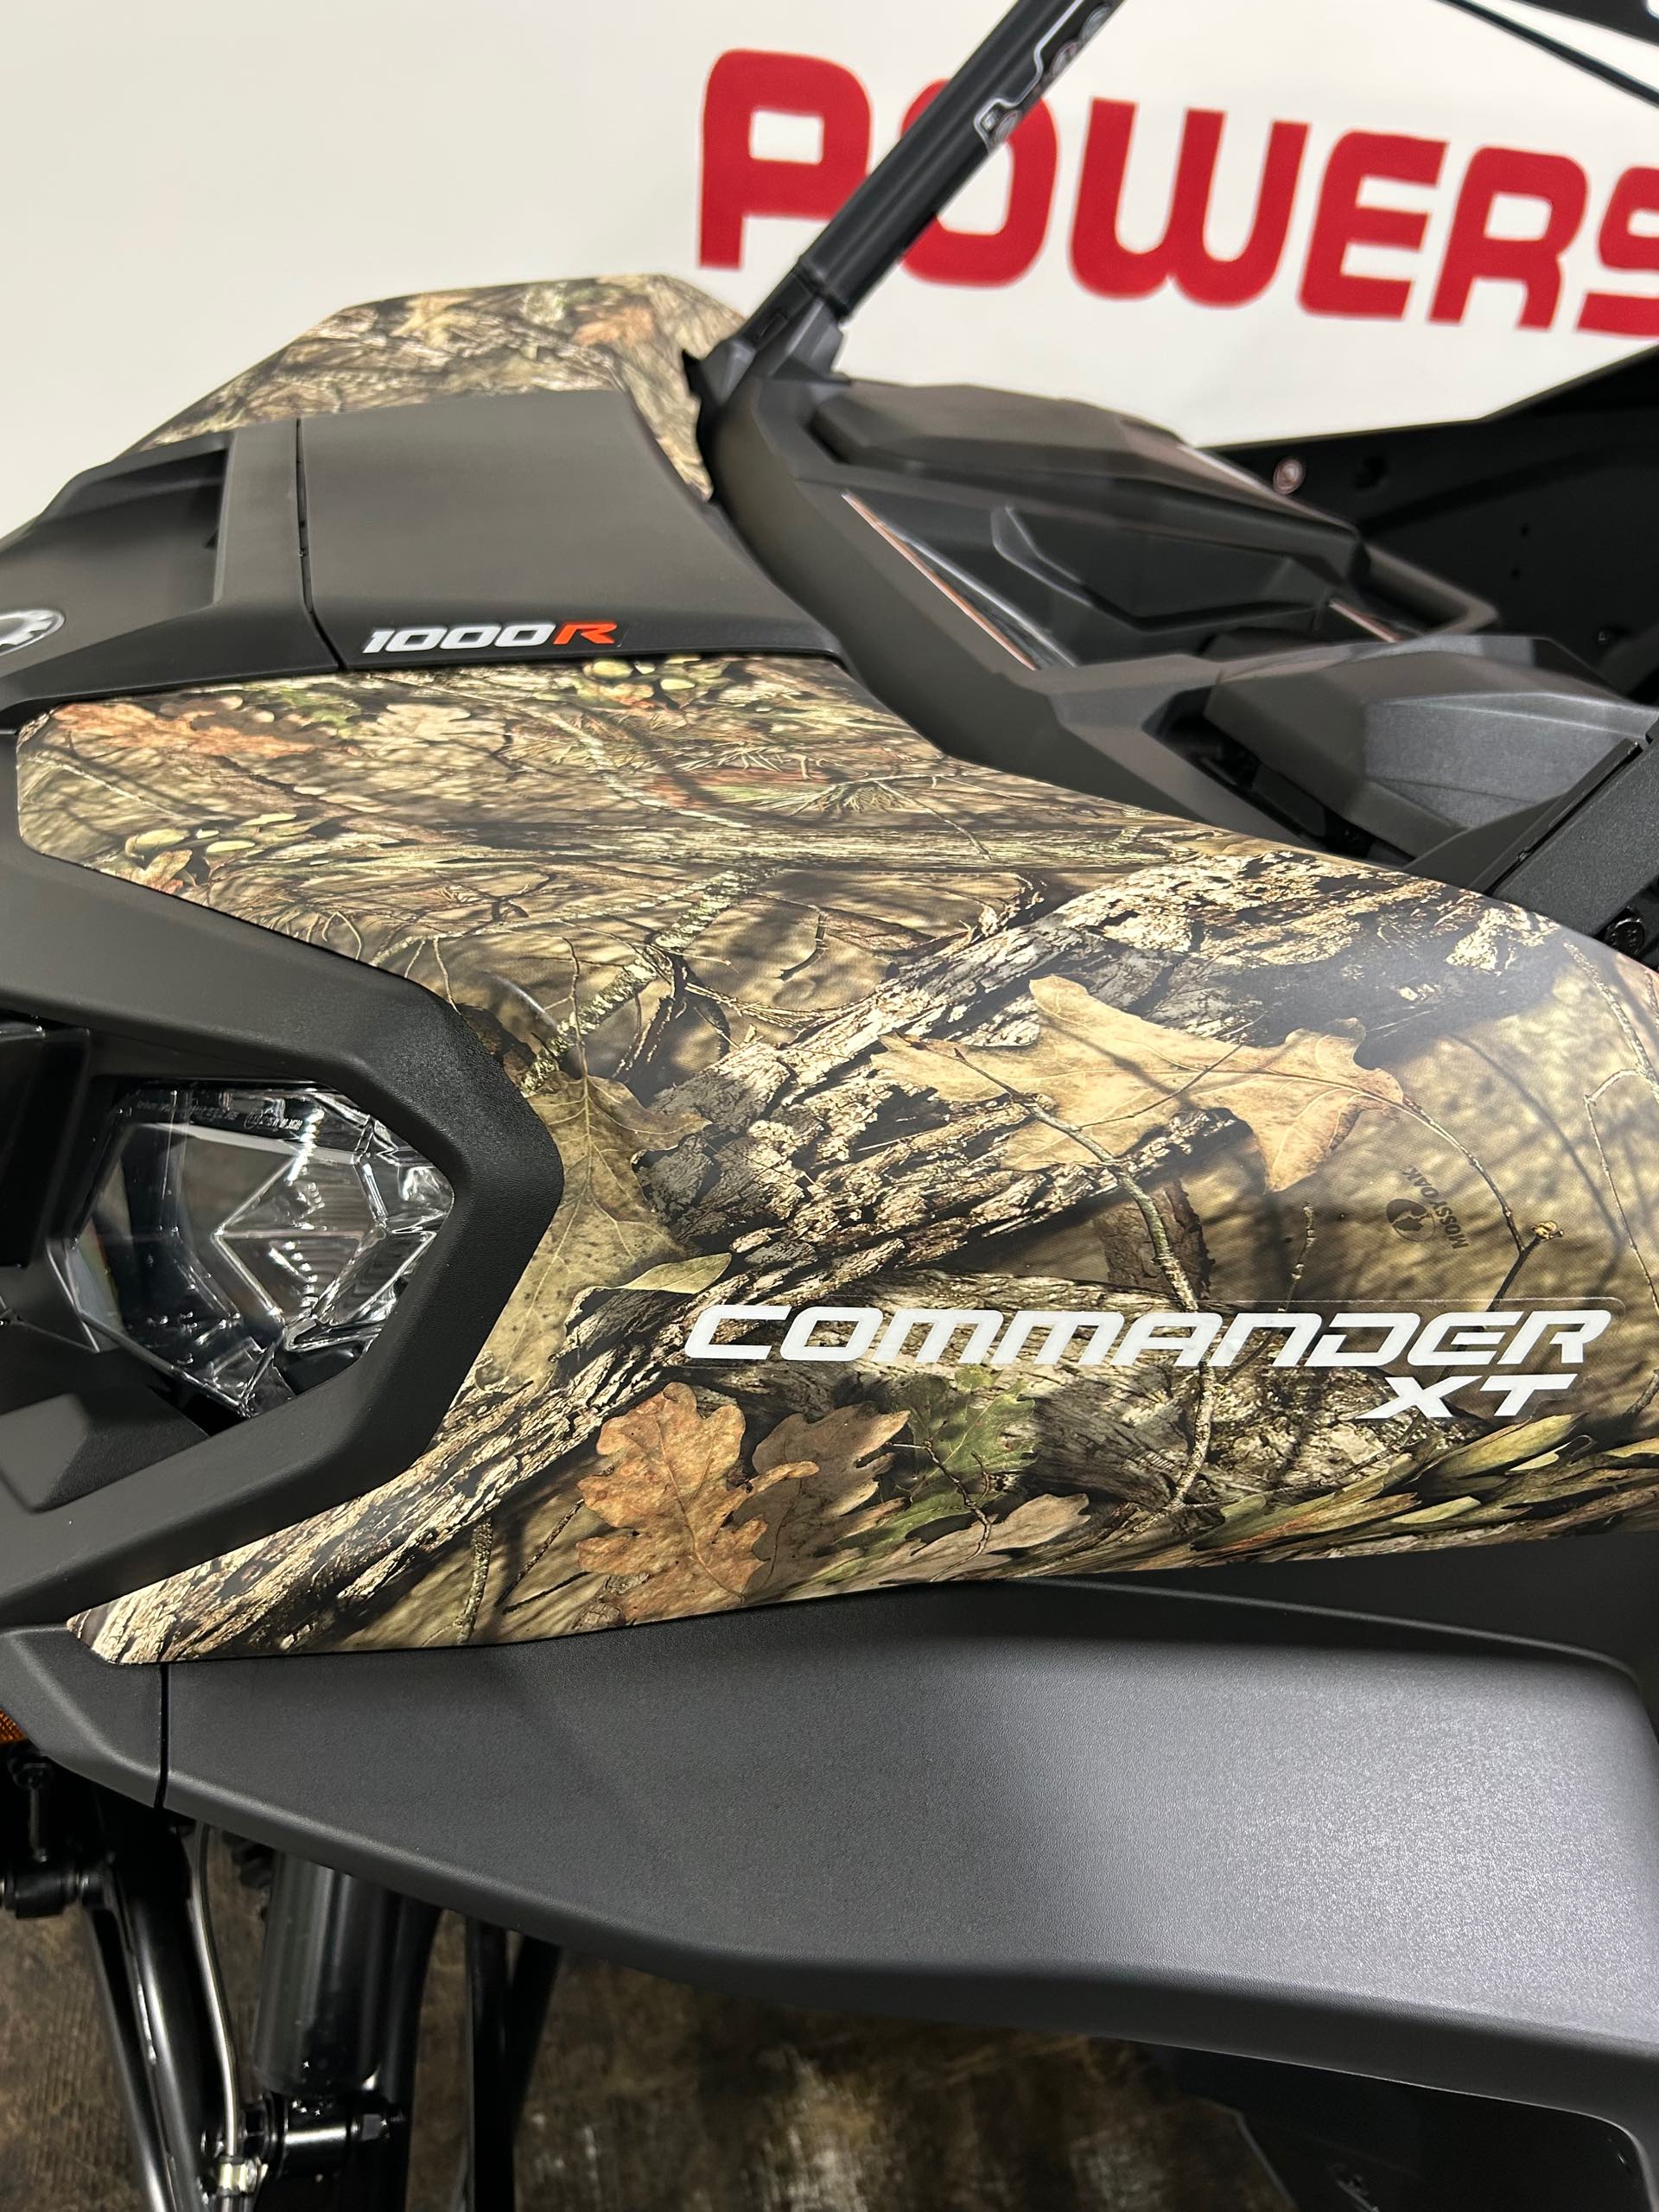 2023 Can-Am Commander MAX XT 1000R at Wood Powersports Harrison